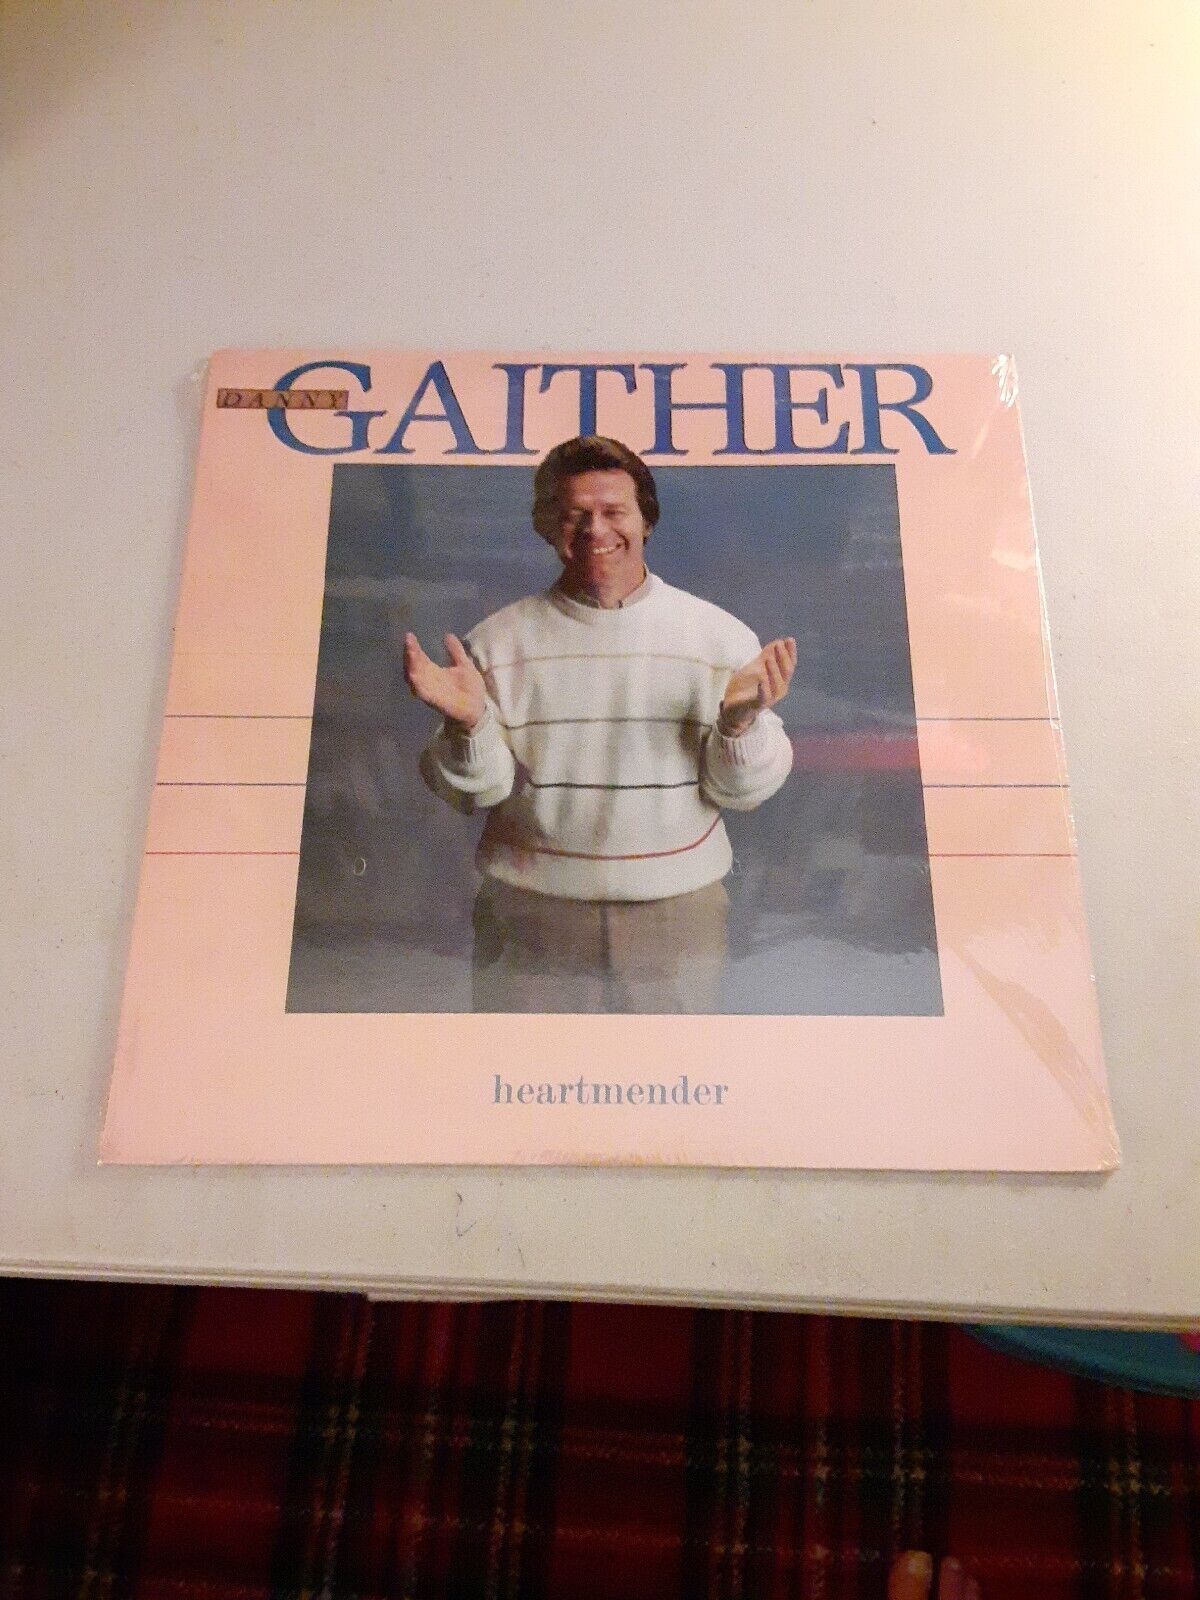 Primary image for Danny Gaither - Heartmender (LP, 1982) Brand New, Sealed, Bill Gaither Trio